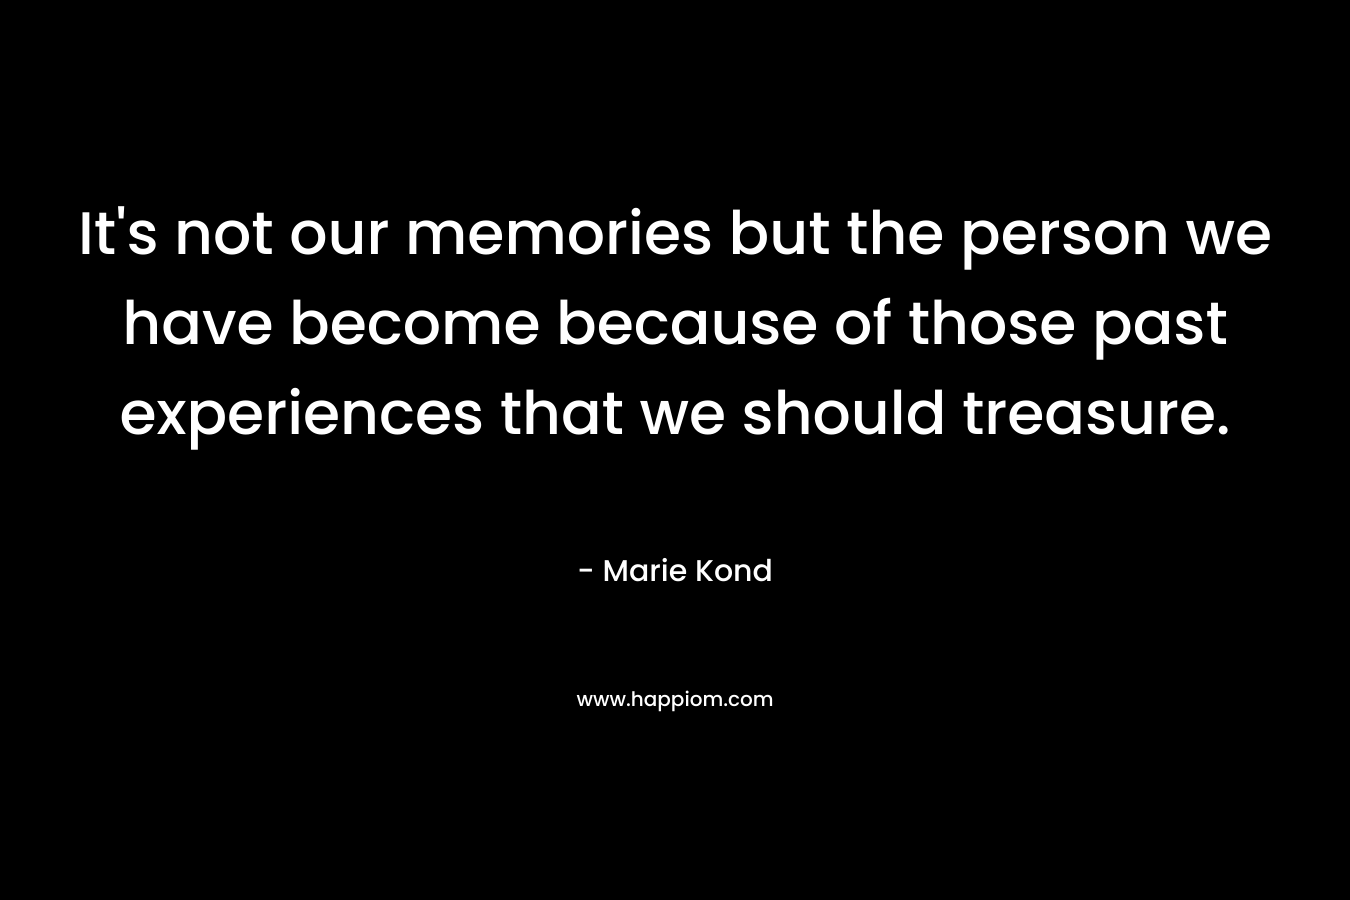 It's not our memories but the person we have become because of those past experiences that we should treasure.